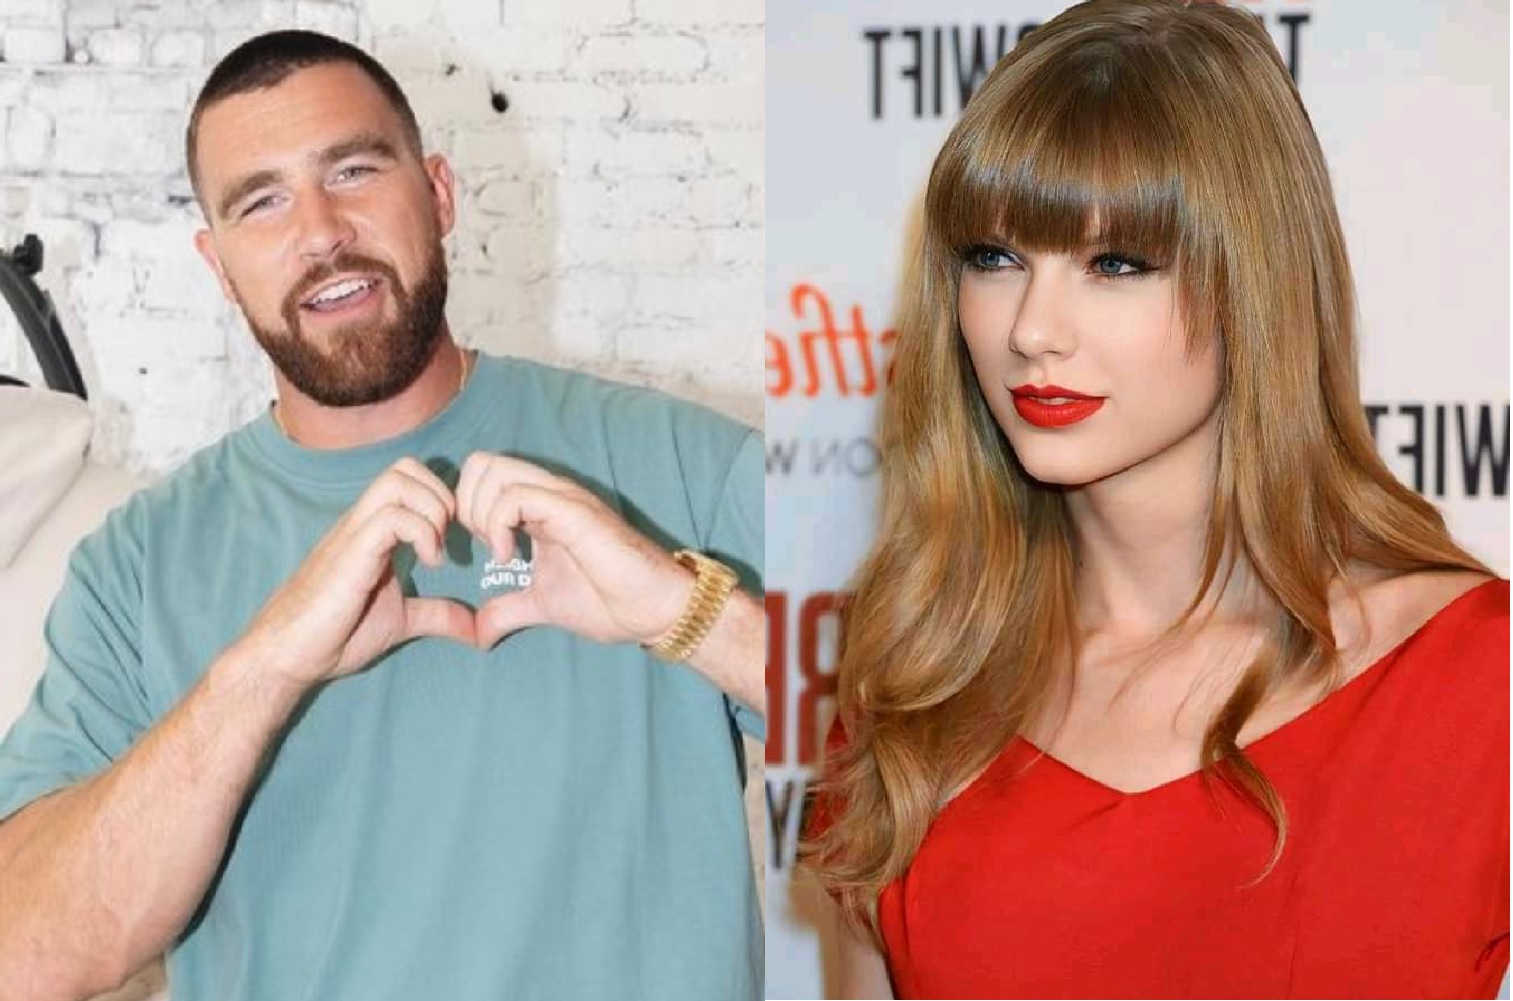 Travis Kelce shares how Taylor Swift romance began: 'I had somebody playing Cupid' “She’ll probably hate me for saying this, but when she came to Arrowhead, they gave her the big locker room as a dressing room, and her little cousins were taking pictures in front of my locker,"